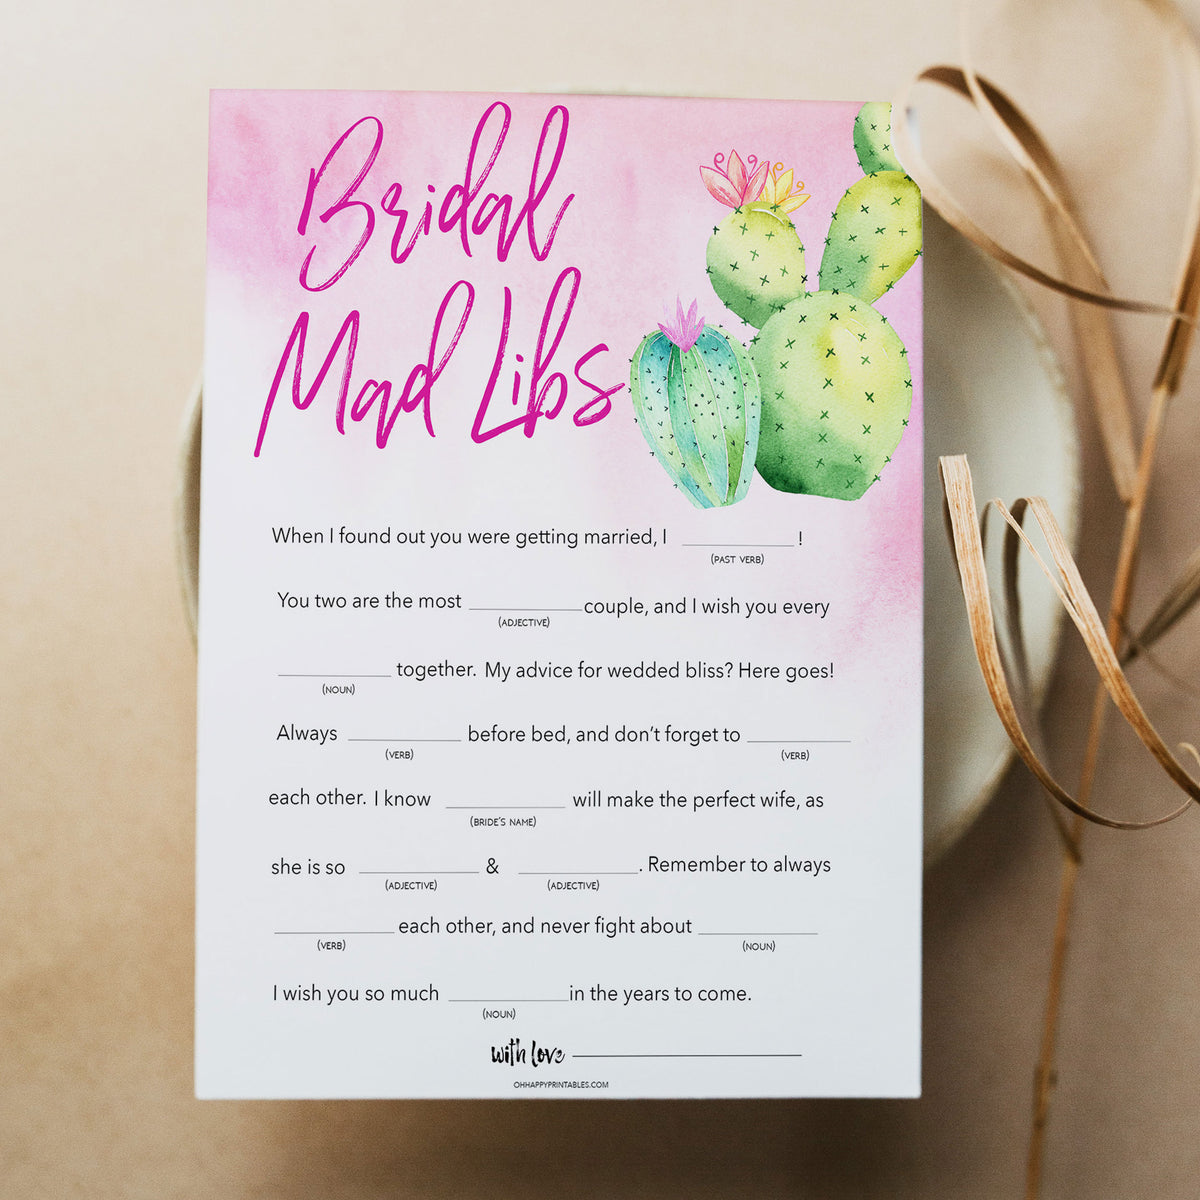 Bridal shower game printable Bridal Mad Libs, with a pink fiesta background and watercolour cactus design